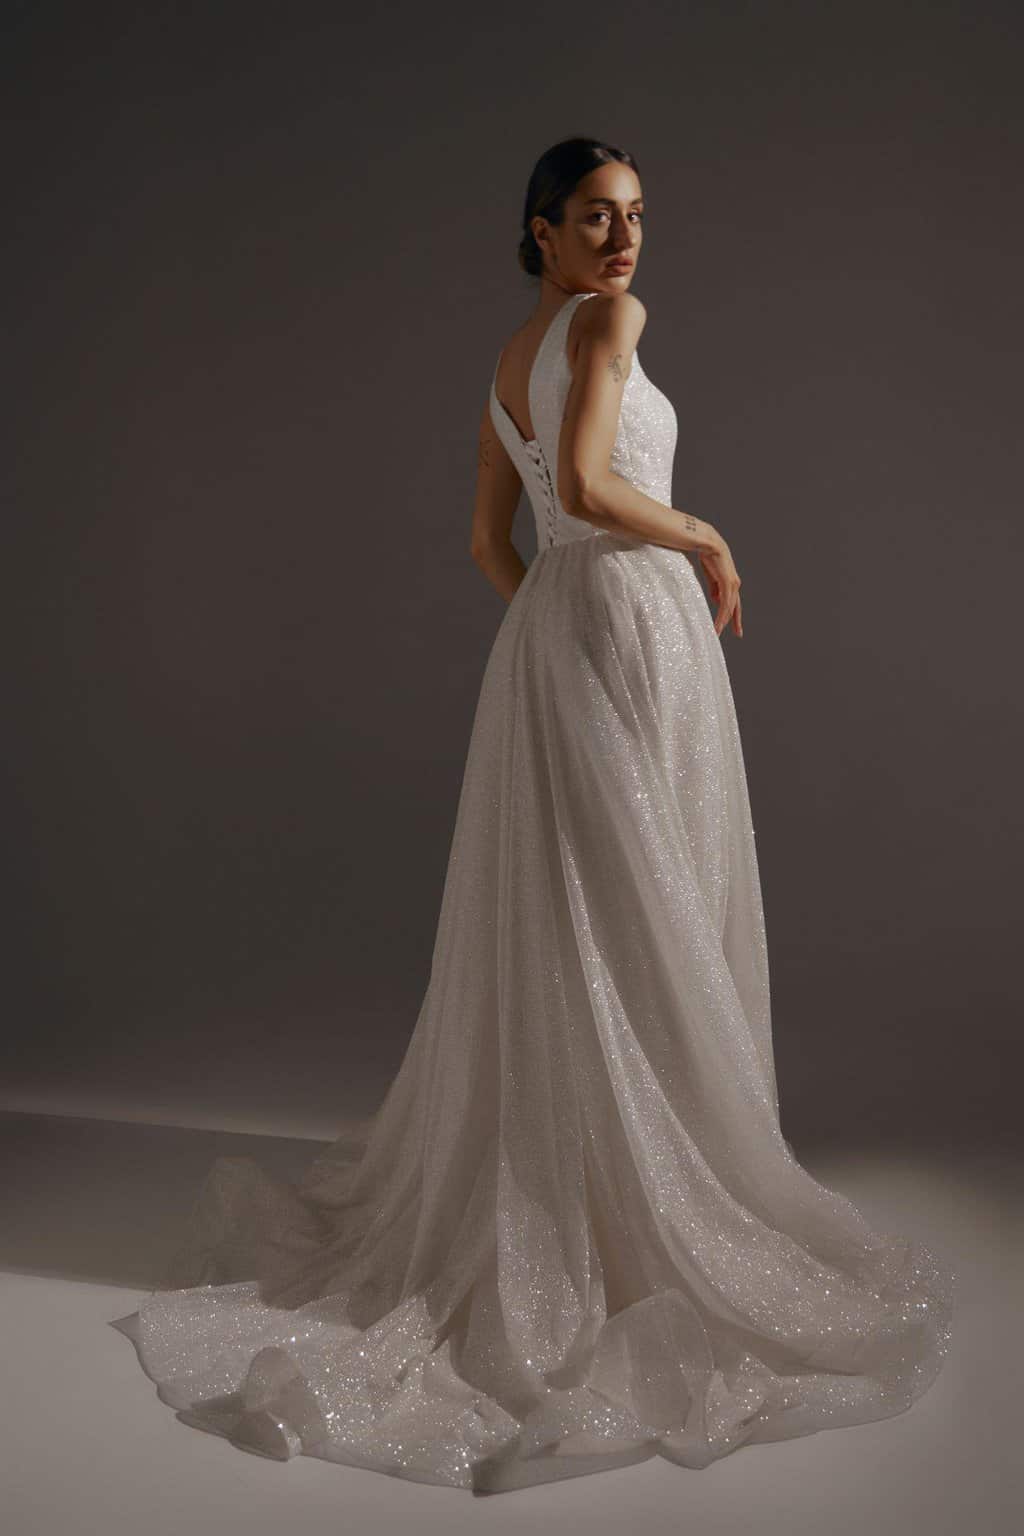 Top 9 Dresses from New Devotion Collection by Olivia Bottega 47